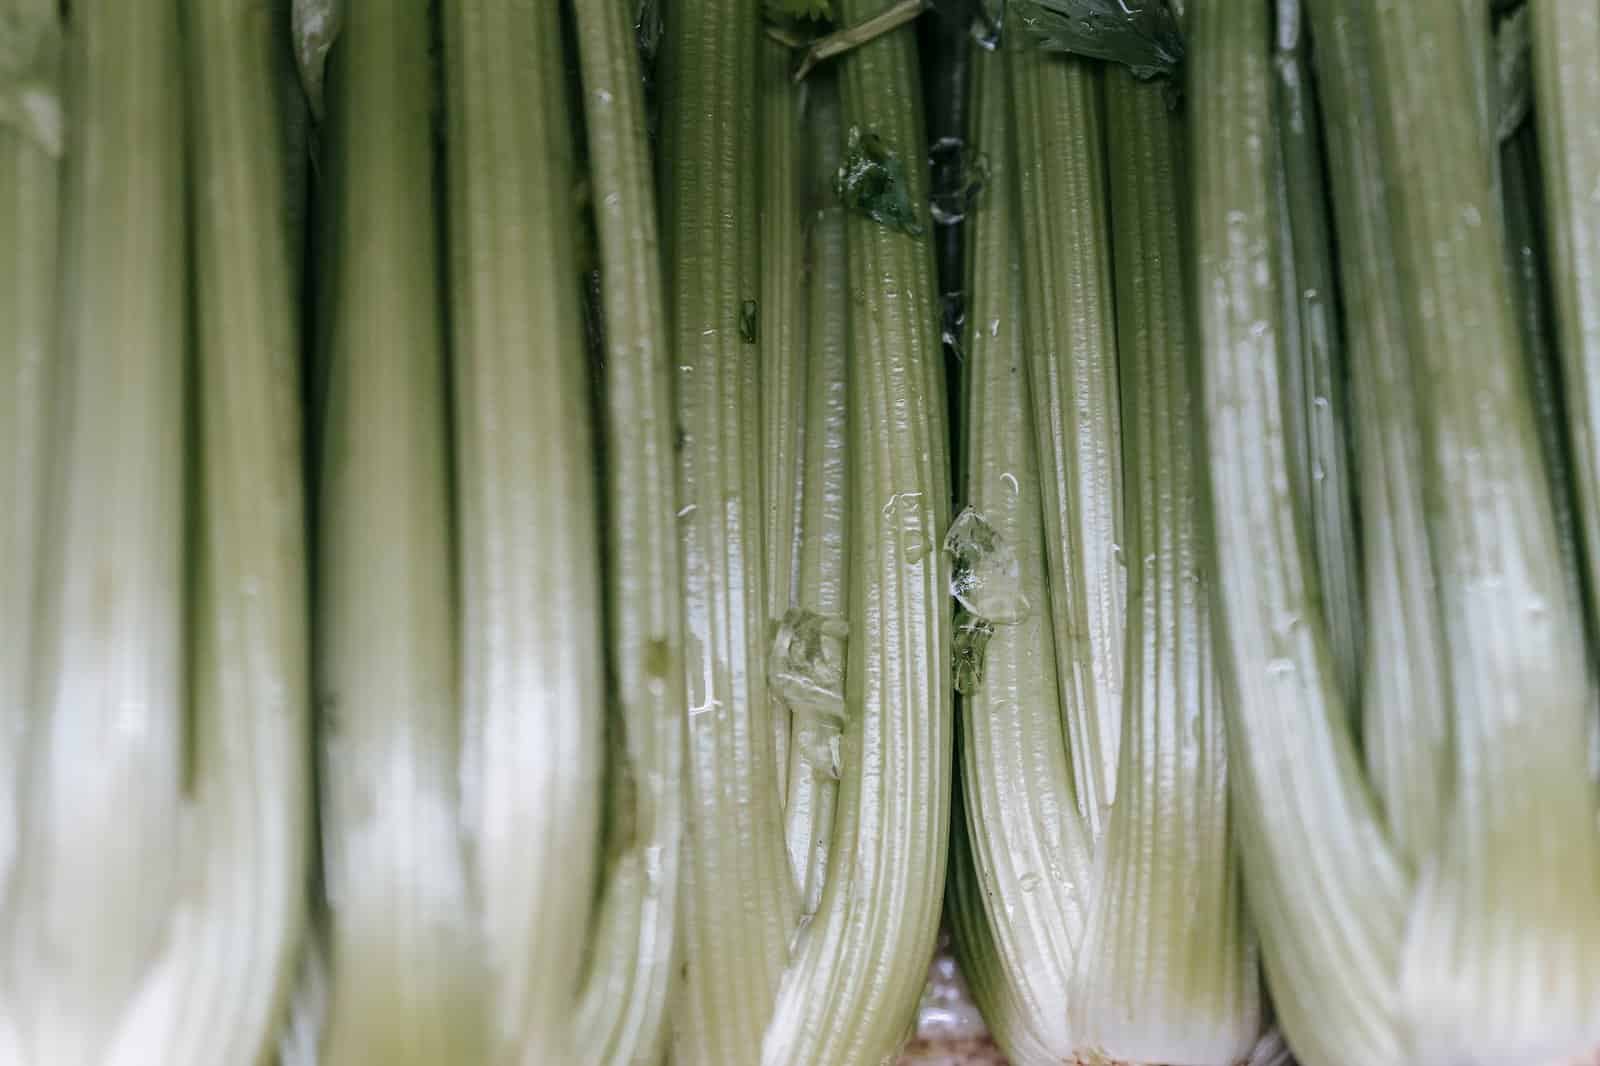 Backdrop of raw celery with wavy leaves and thick green stems in shiny light